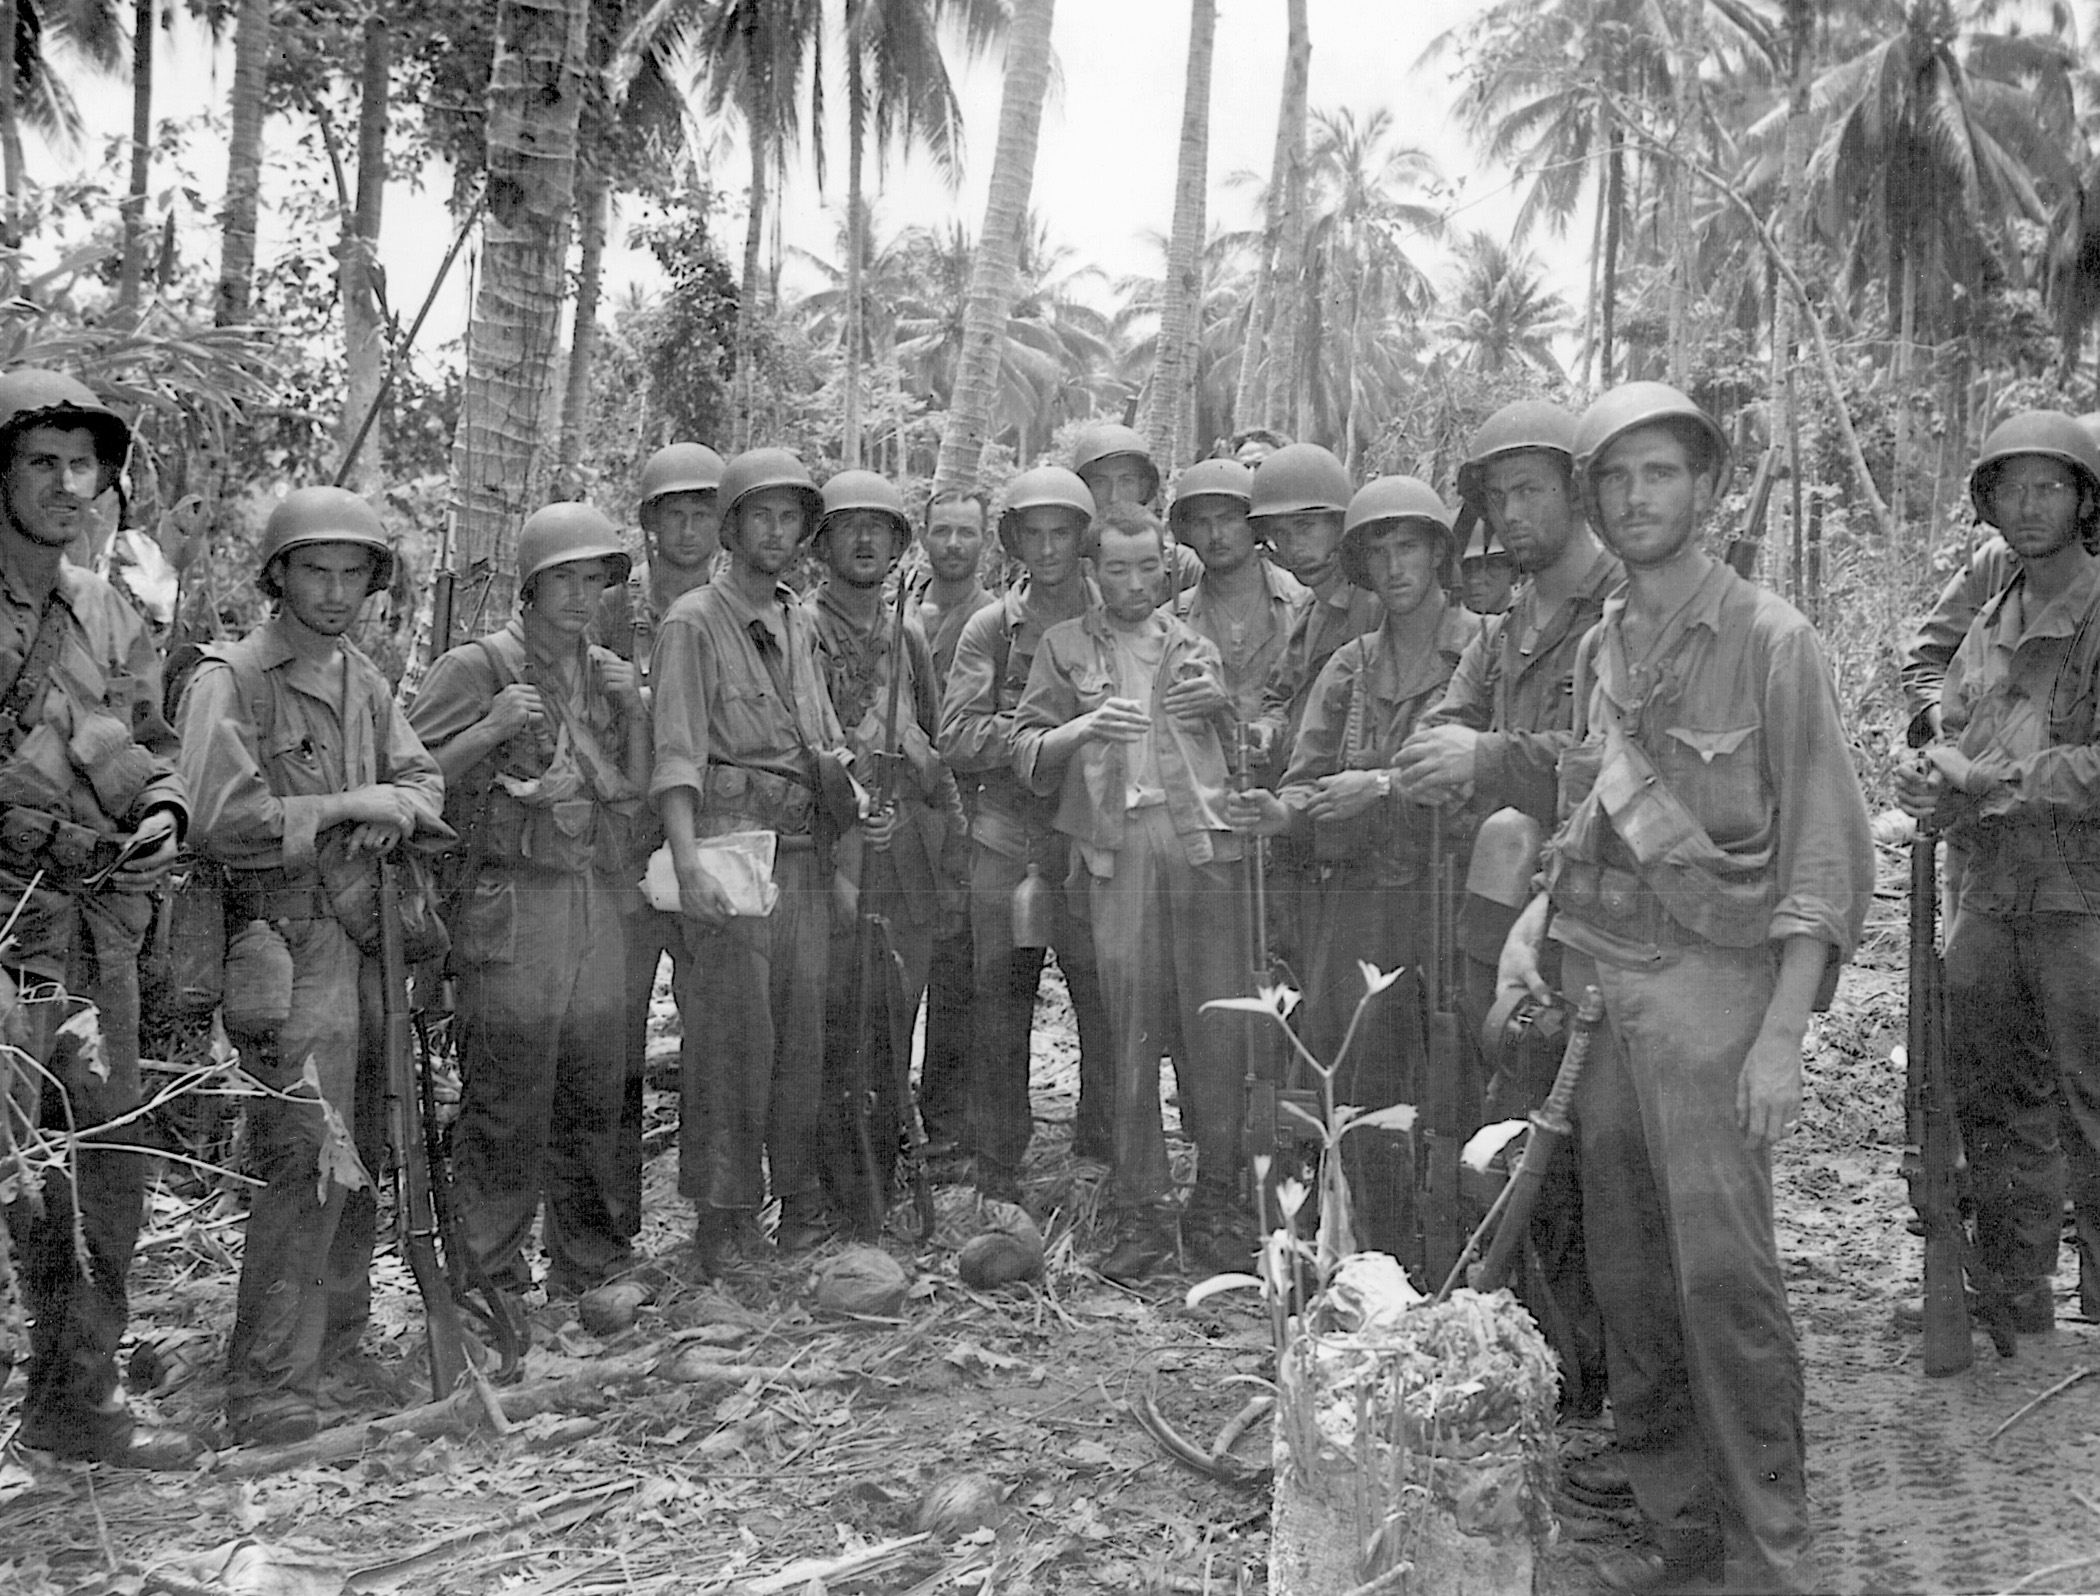 A U.S. Marine patrol pauses for a photograph after completing a reconnaissance mission on Guadalcanal. Their Japanese prisoner is a rare find indeed since enemy troops refused to be taken alive.